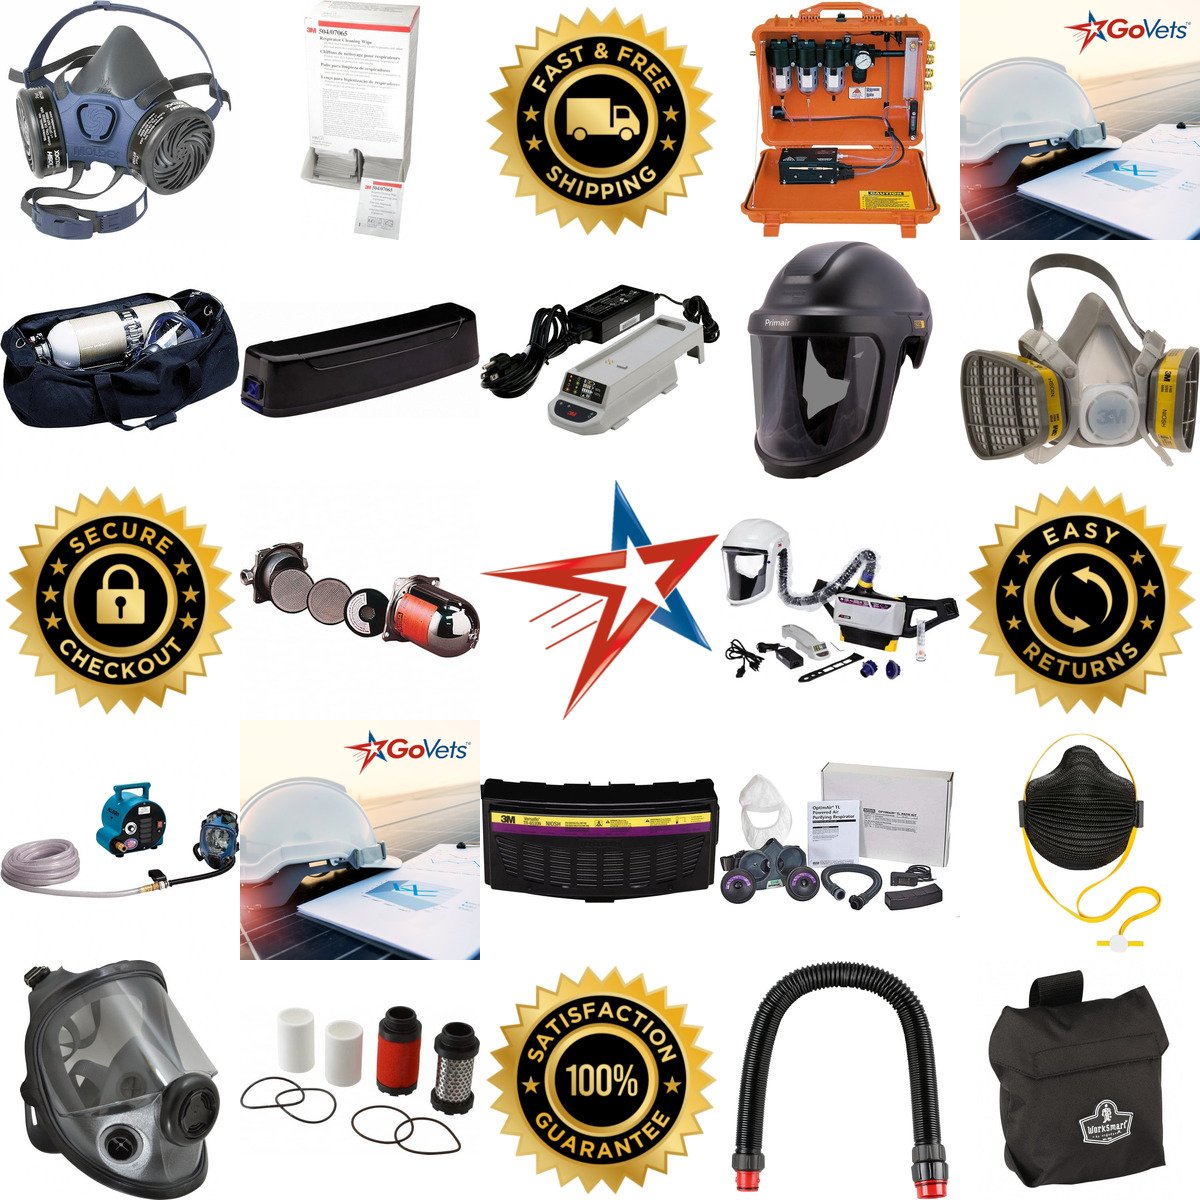 A selection of Respiratory Protection products on GoVets